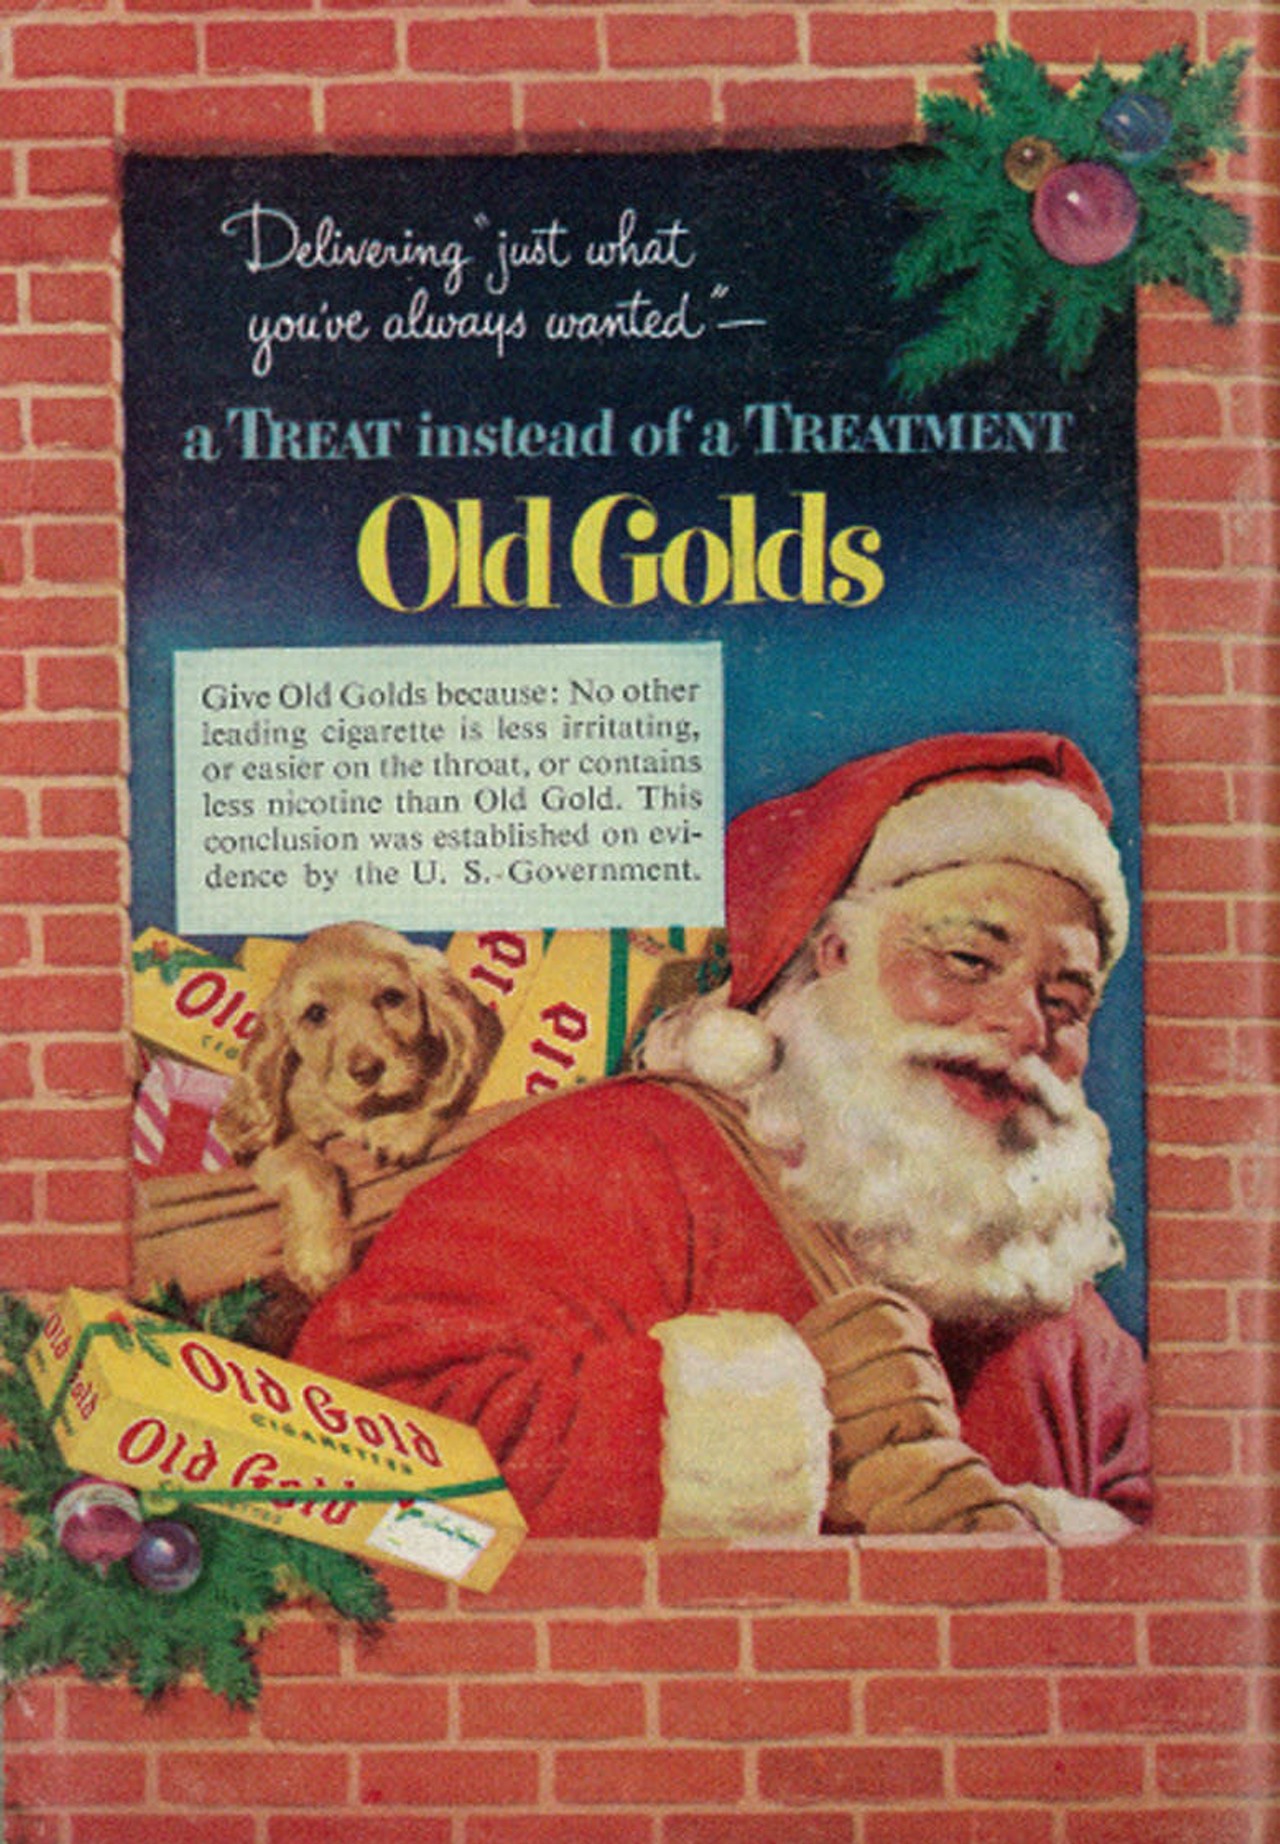 Old Gold Cigarettes with Santa, 1952